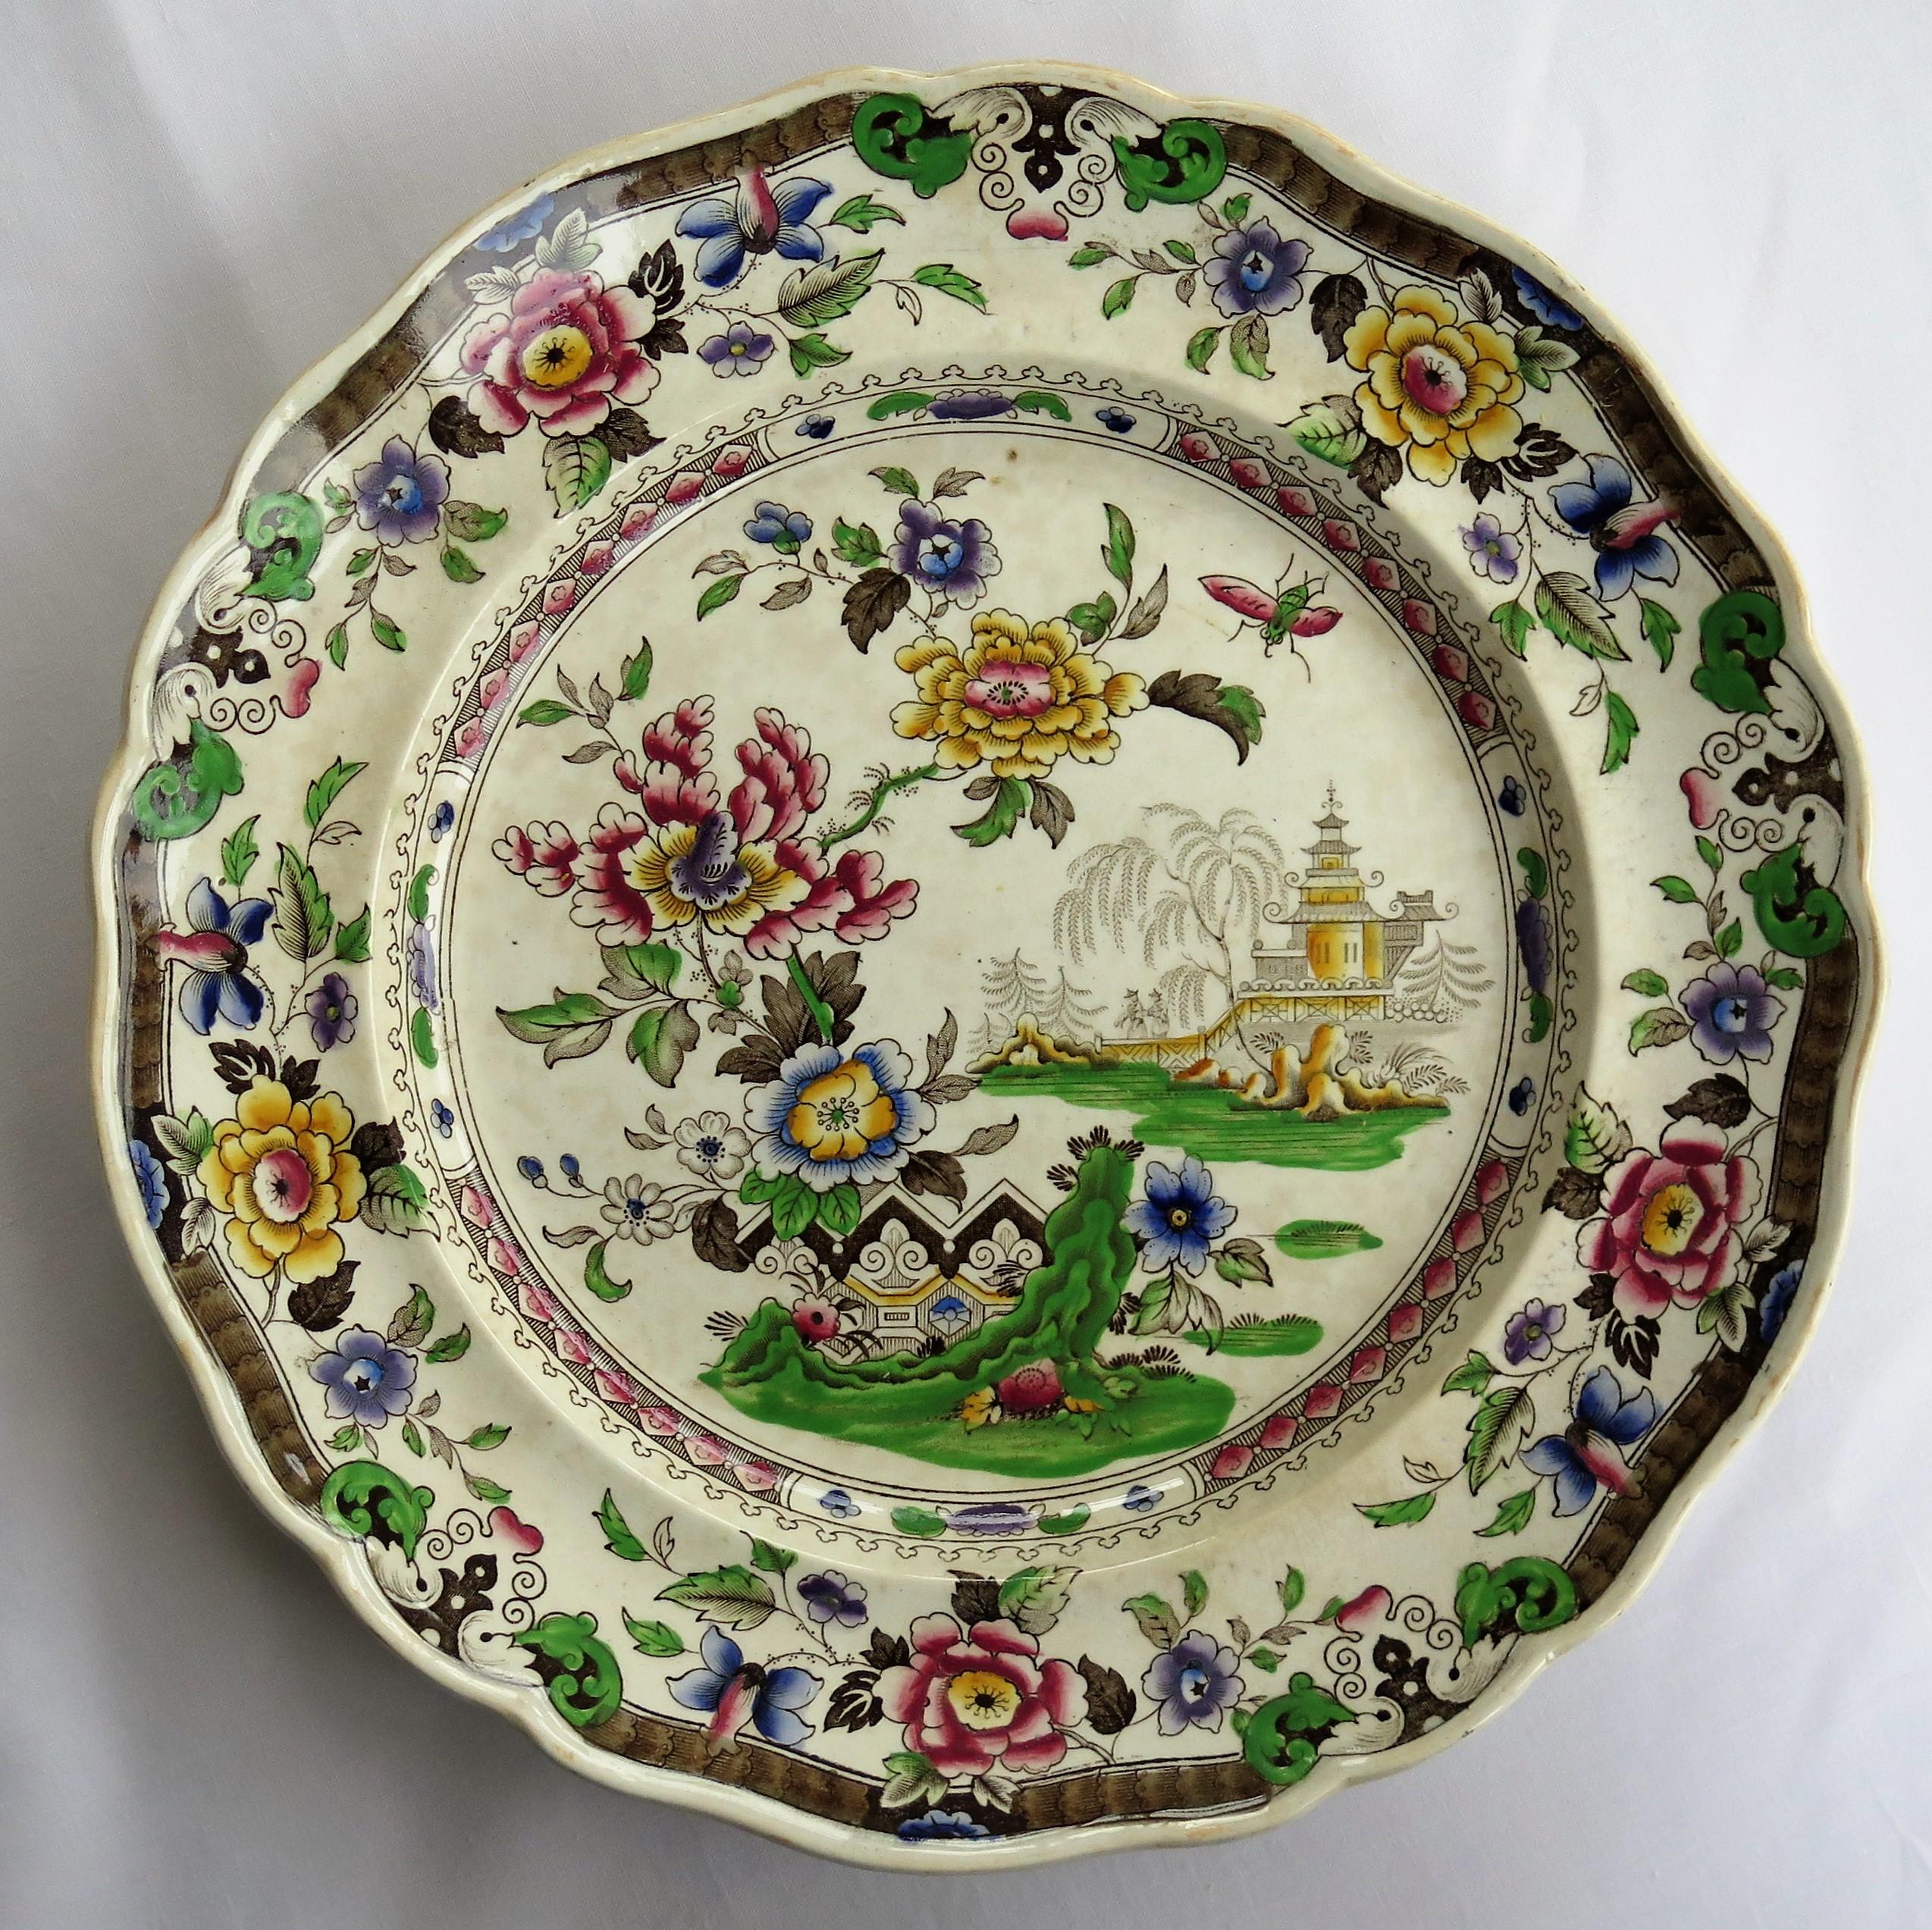 SIX Large Pottery Dinner Plates by Zachariah Boyle Chinese Flora Ptn, circa 1825 2